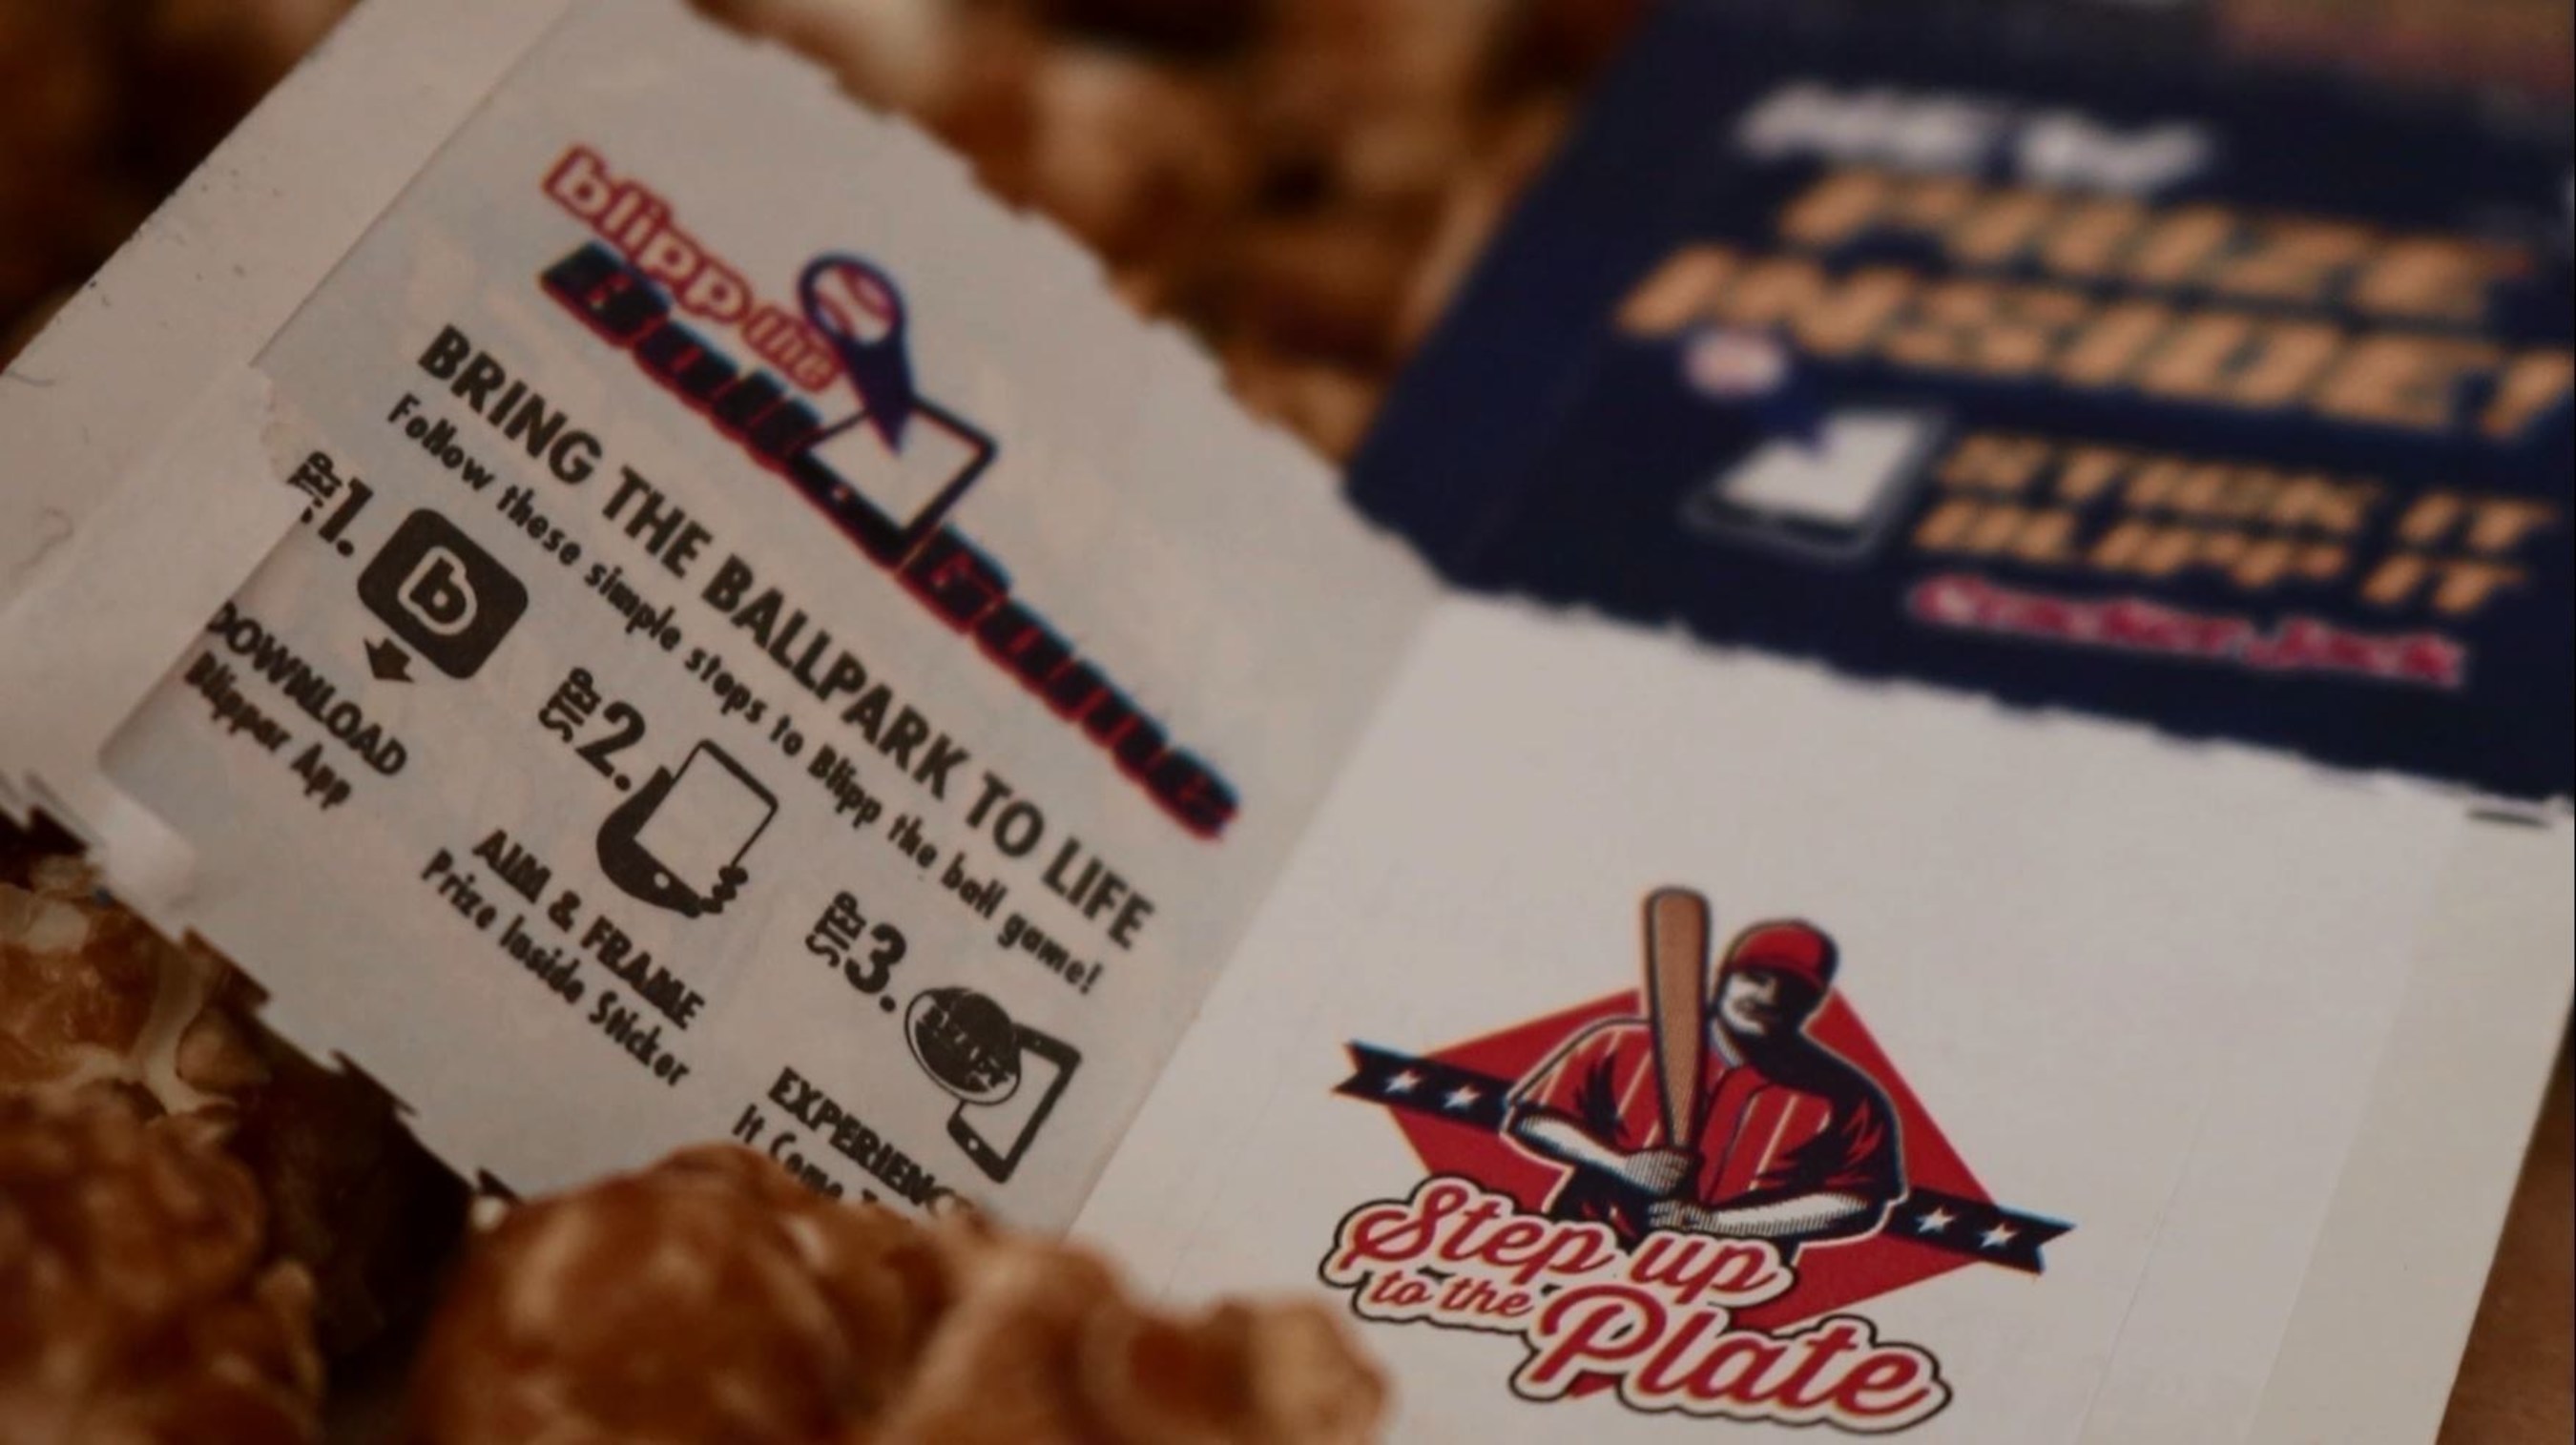 Cracker Jack introduces new Prize Inside where families can scan the sticker inside to enjoy their favorite baseball moments through a one-of-a-kind mobile experience.